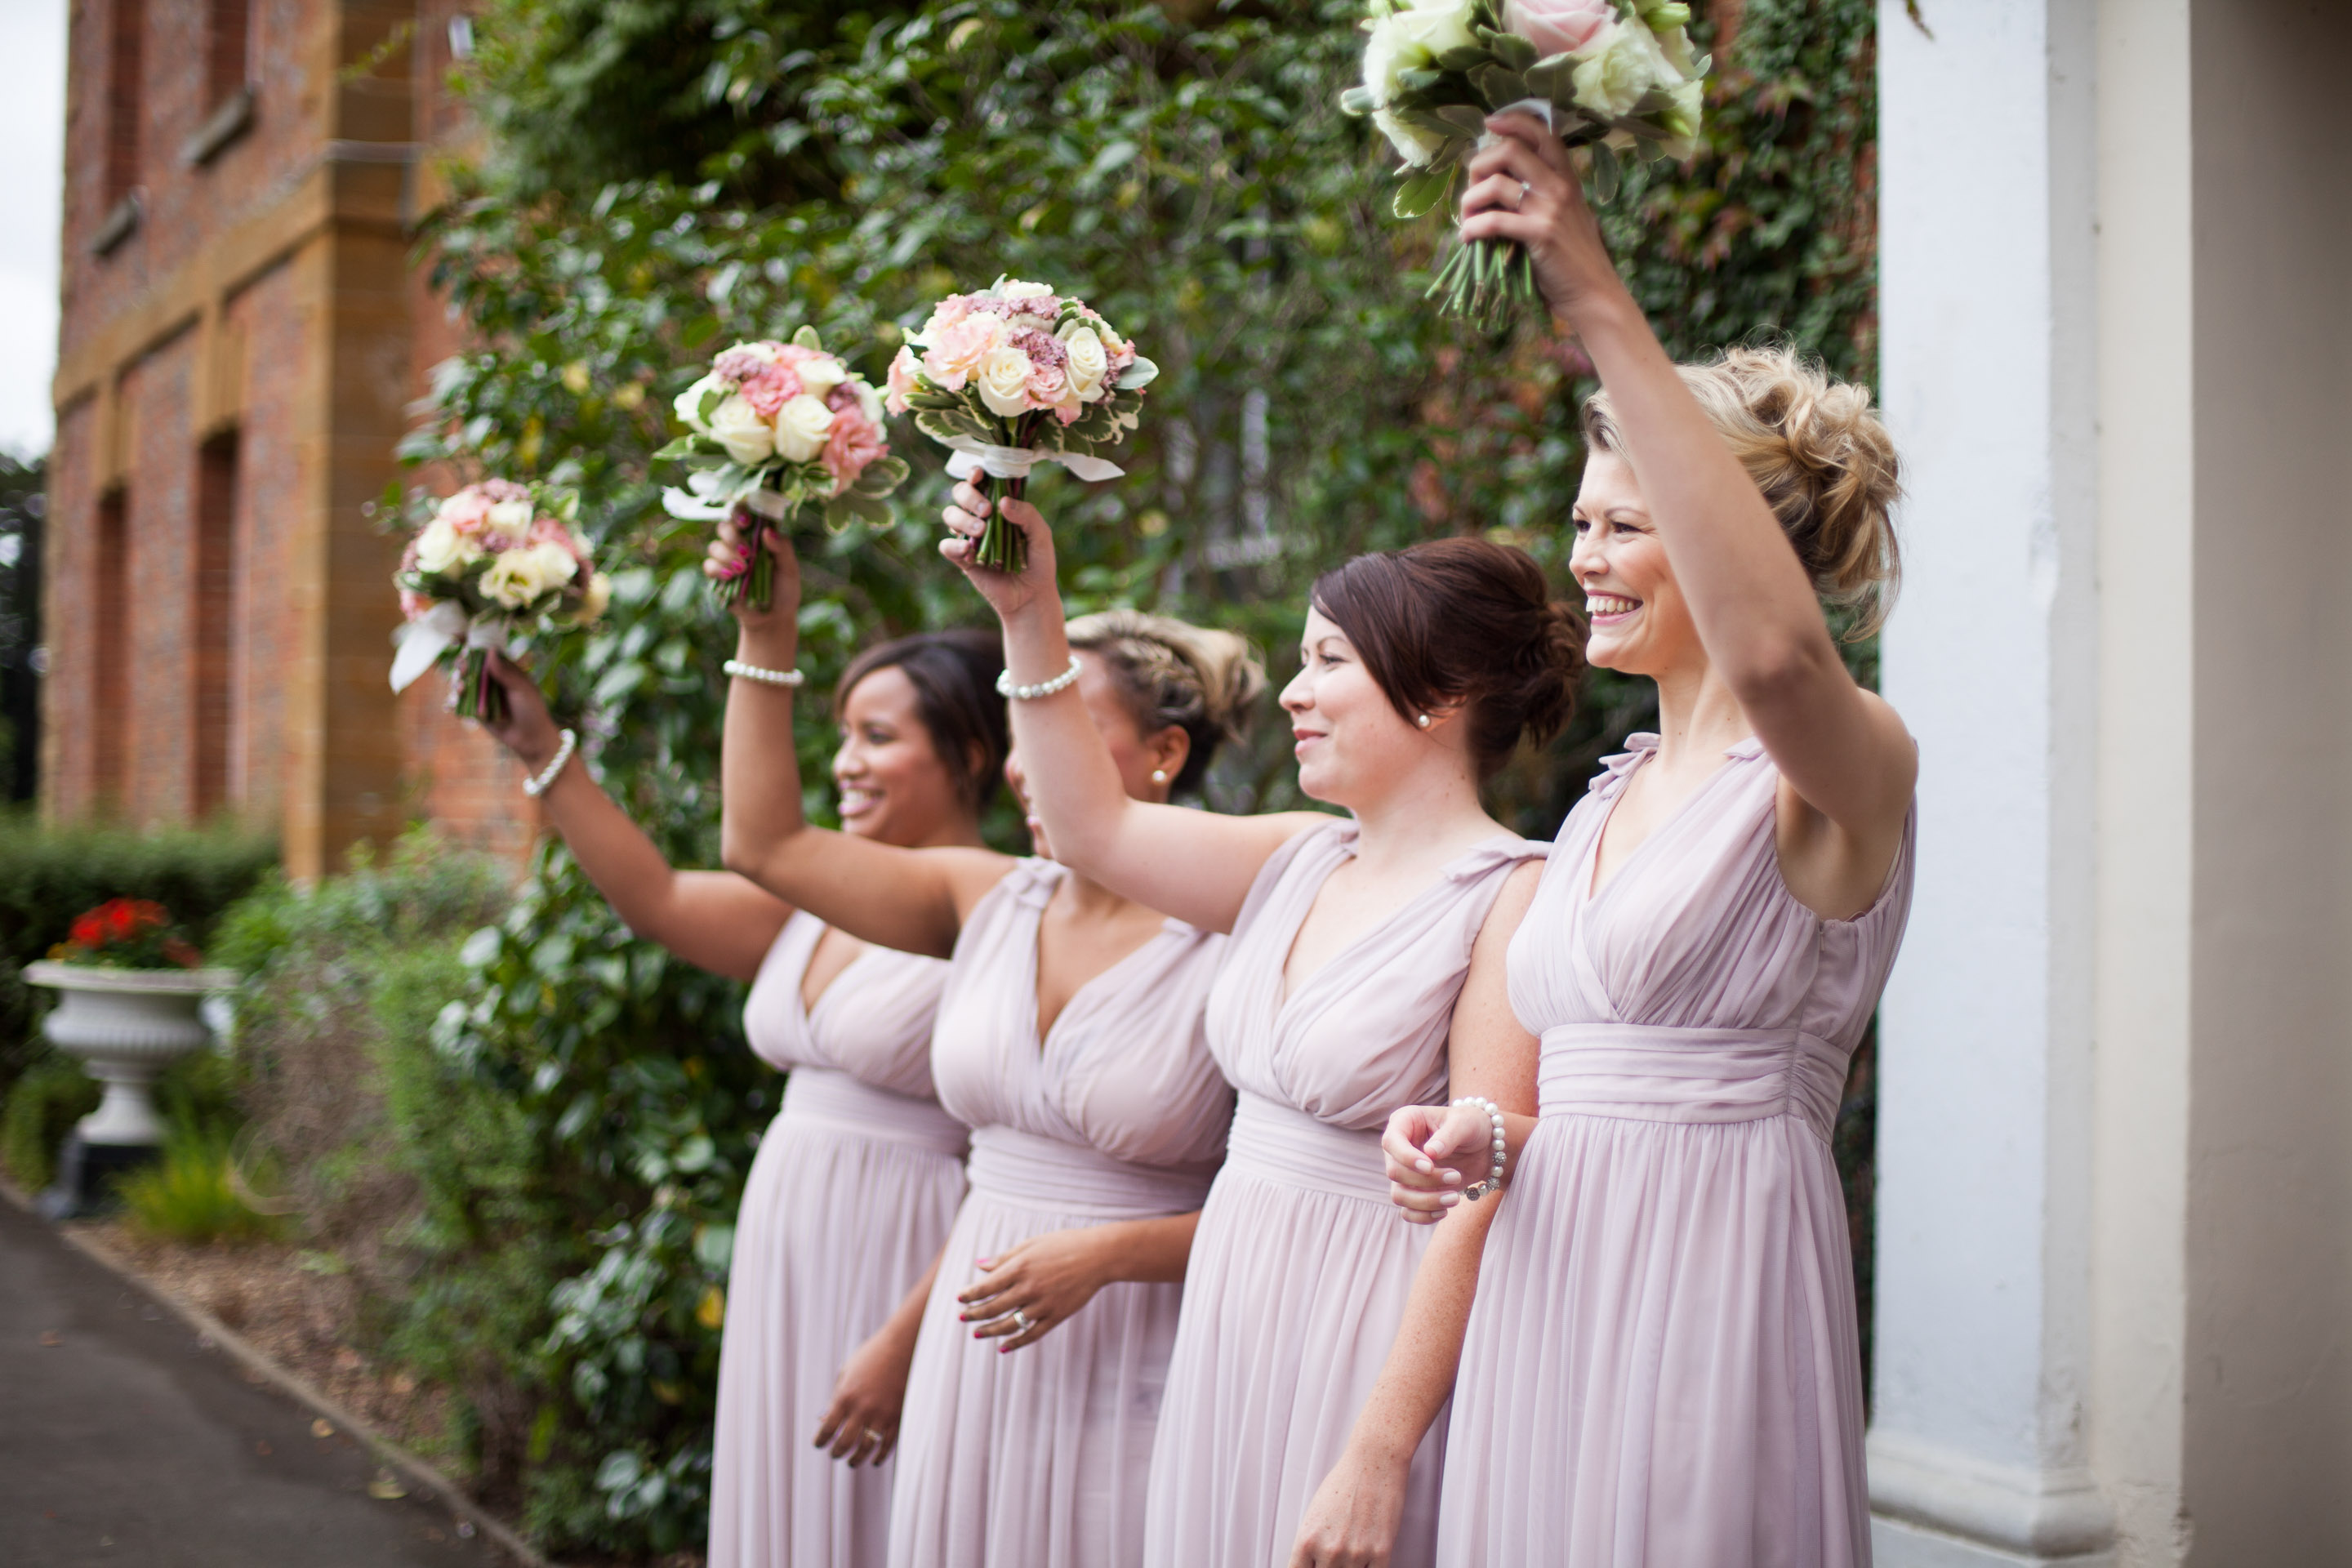 Bridesmaids, Flowers in the air